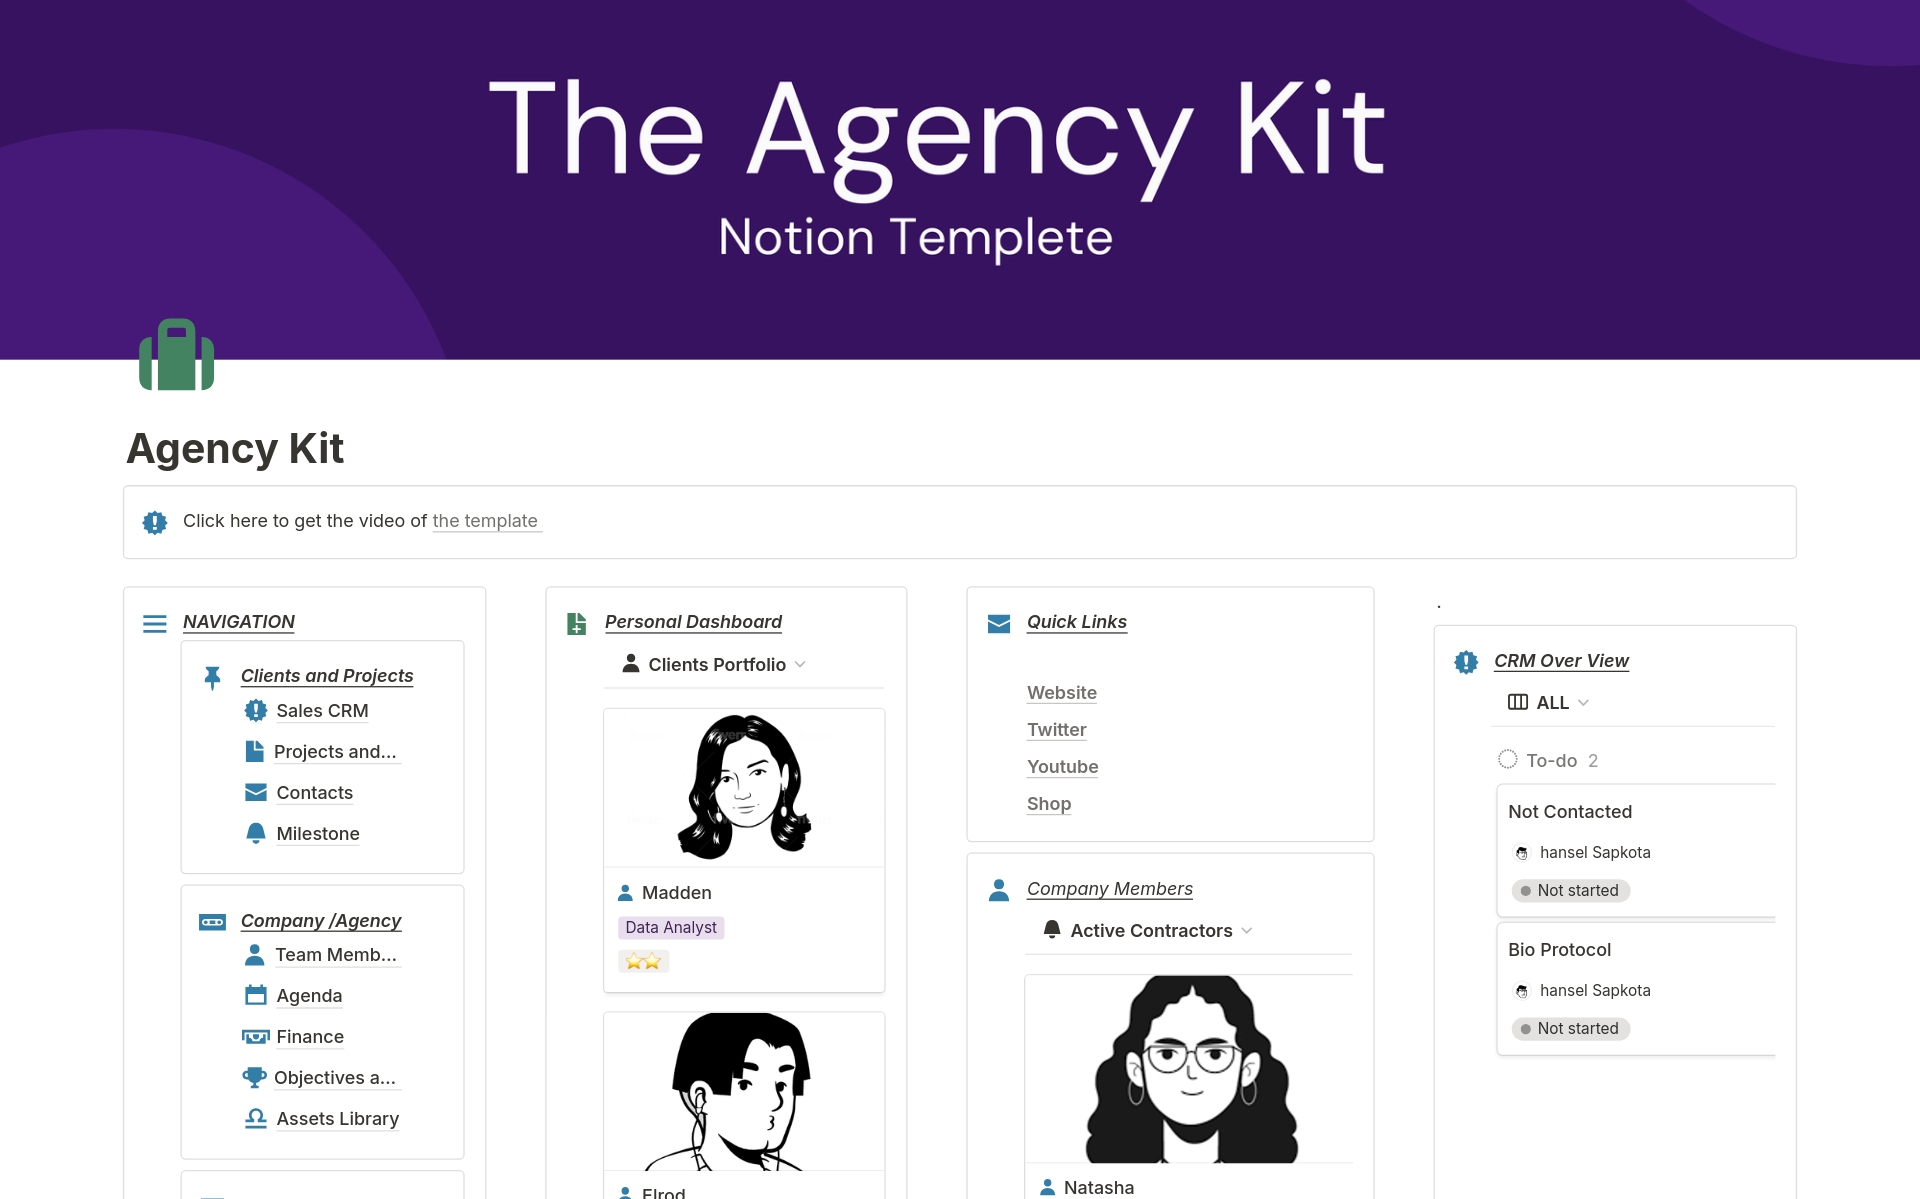 "Simplify. Collaborate. Succeed. With the Notion Agency Kit, your agency's success is streamlined."